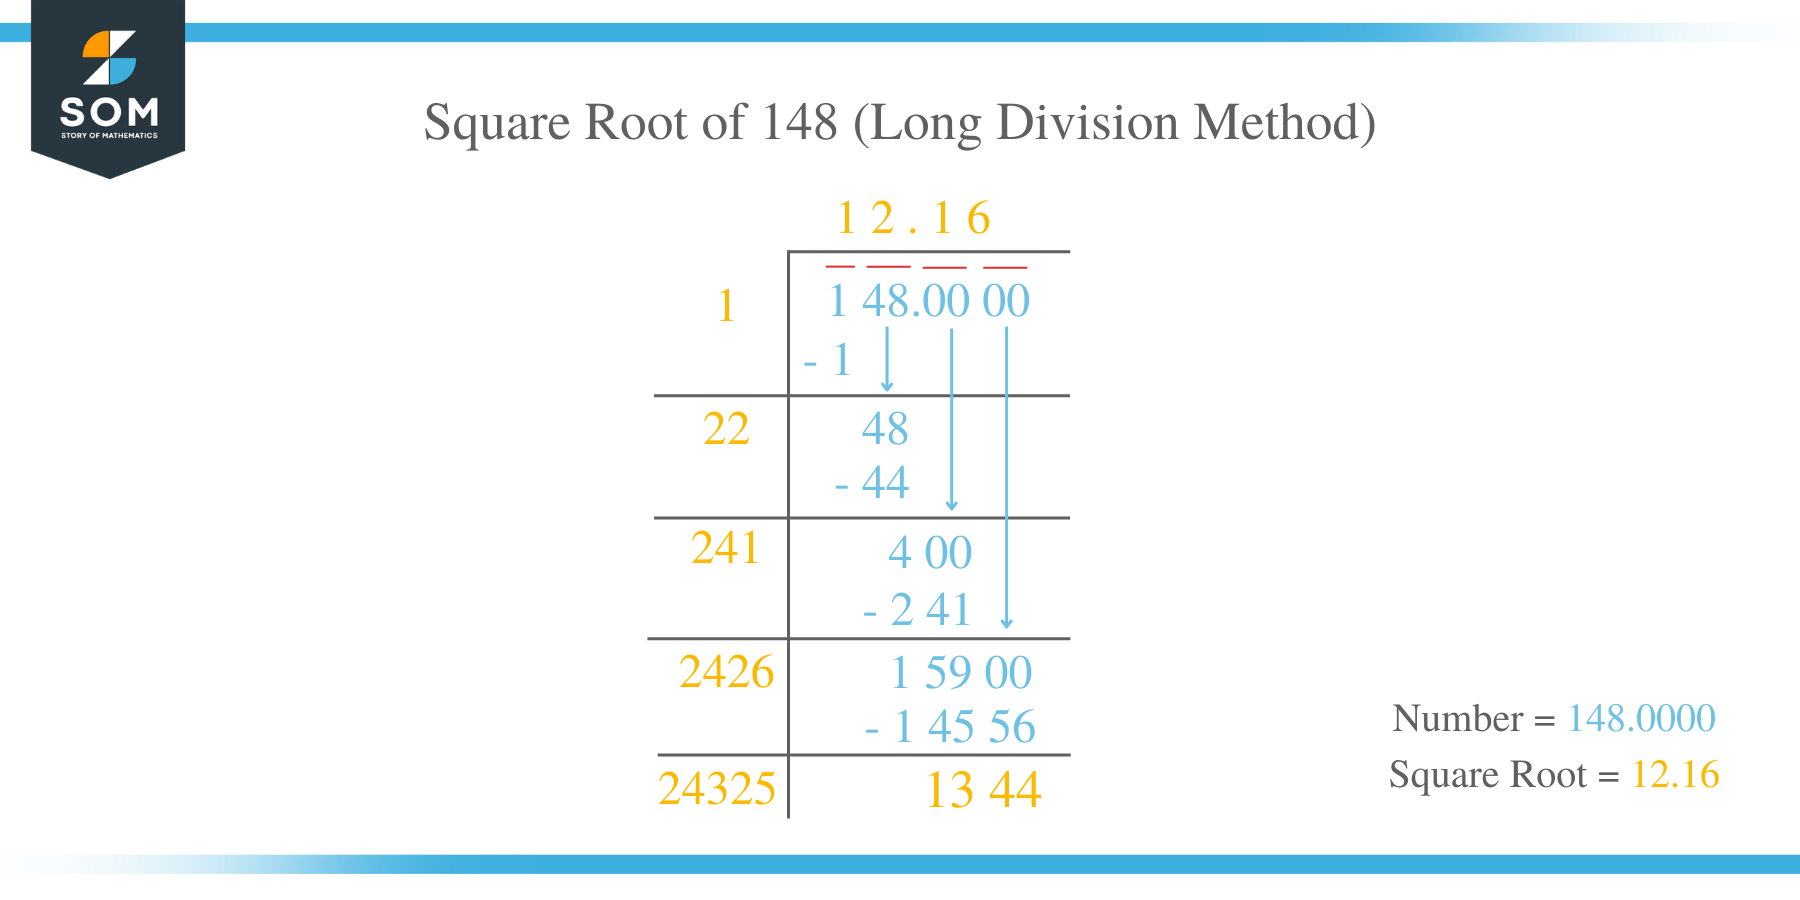 Square Root of 148 by Long Division Method